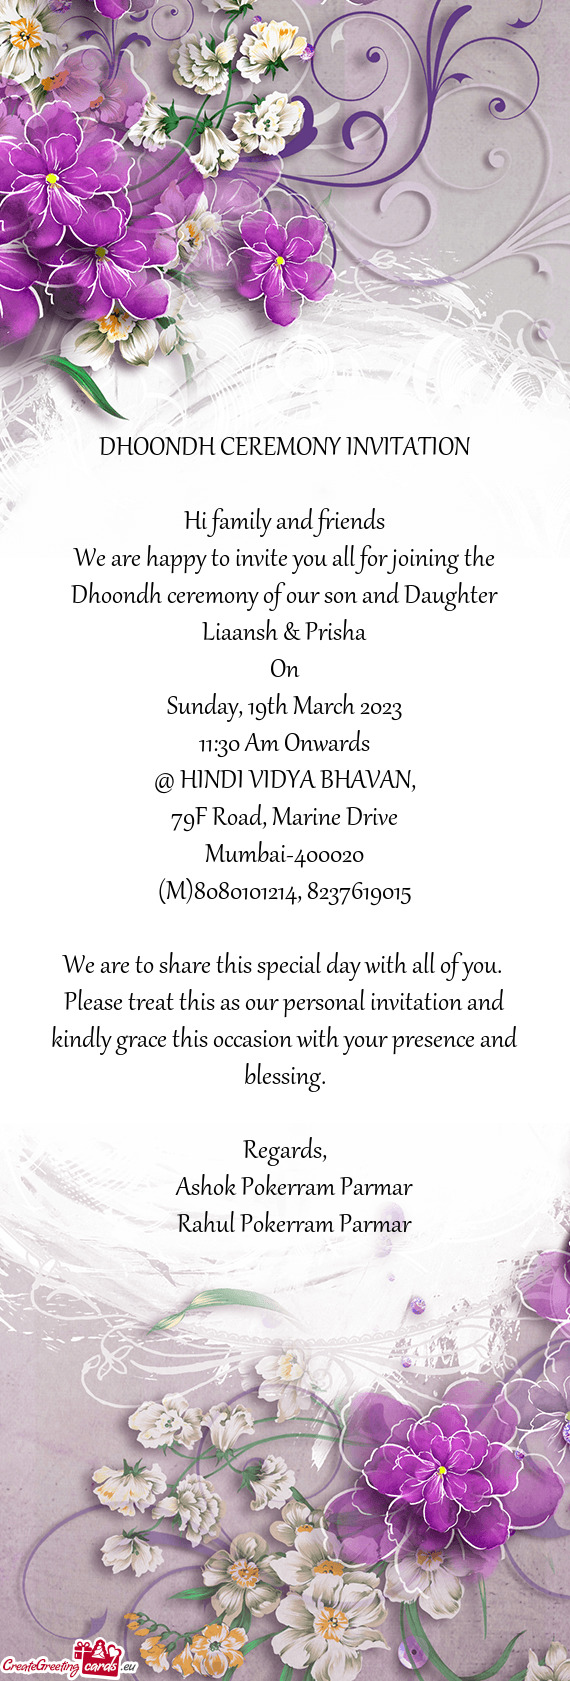 We are happy to invite you all for joining the Dhoondh ceremony of our son and Daughter Liaansh & Pr